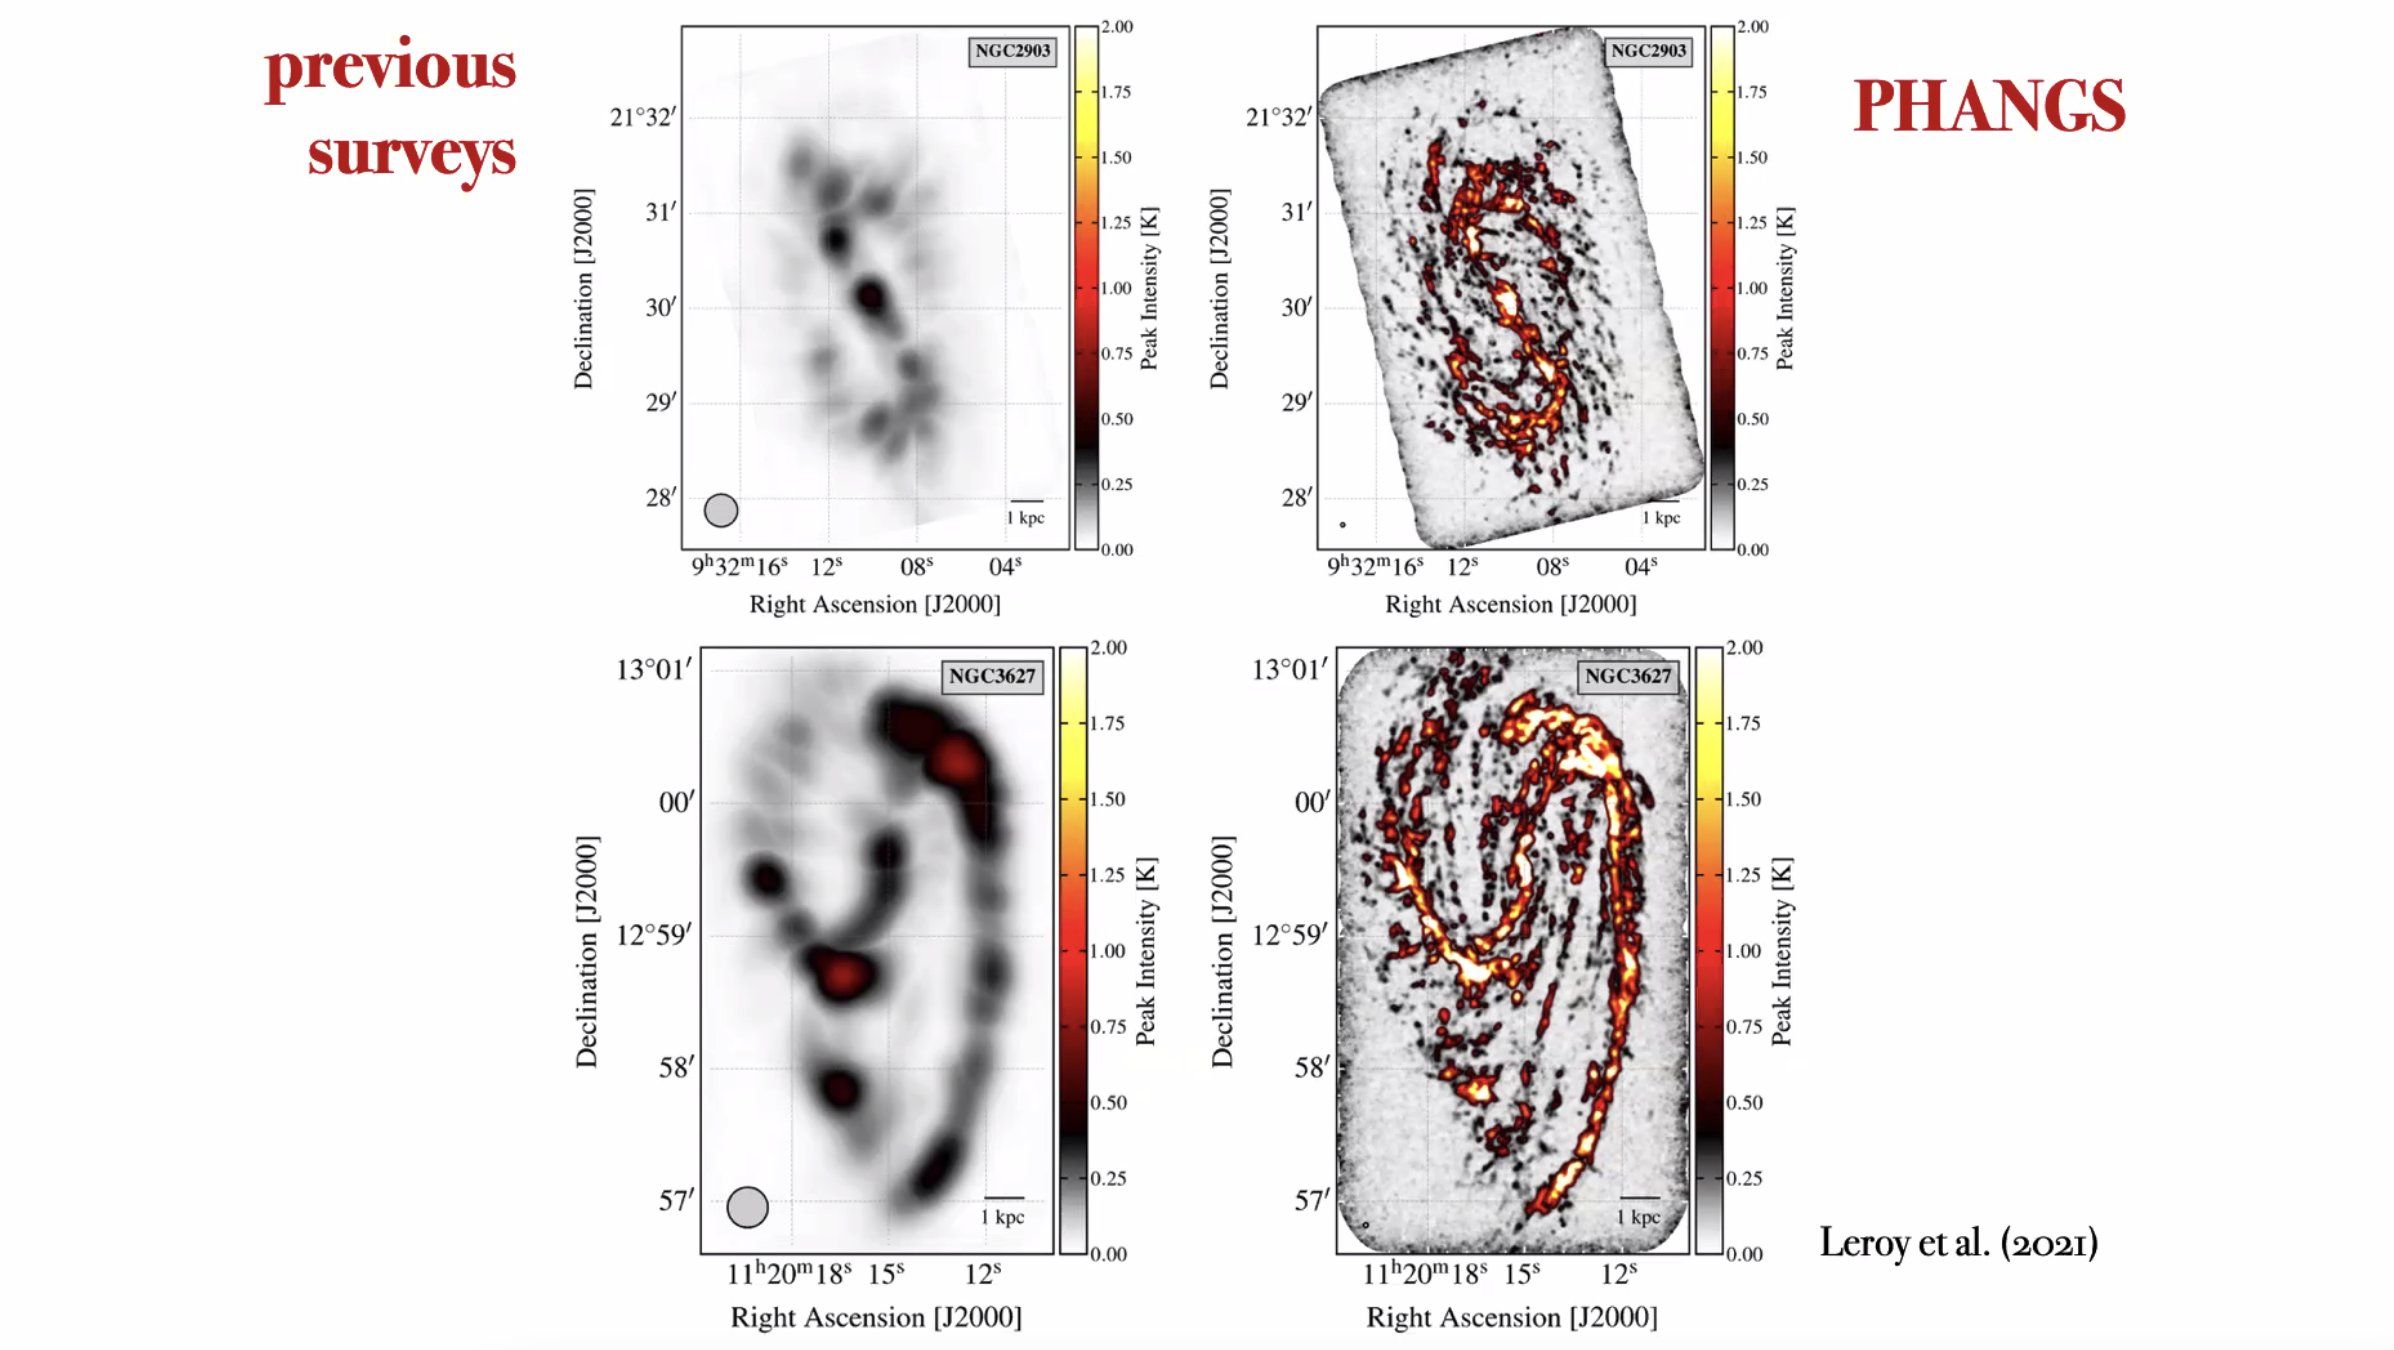 Left: Two images of blurry spiral galaxies. Right: from the PHANGS survey, very sharp image showing details of the spiral structure and clear gas density gradients.